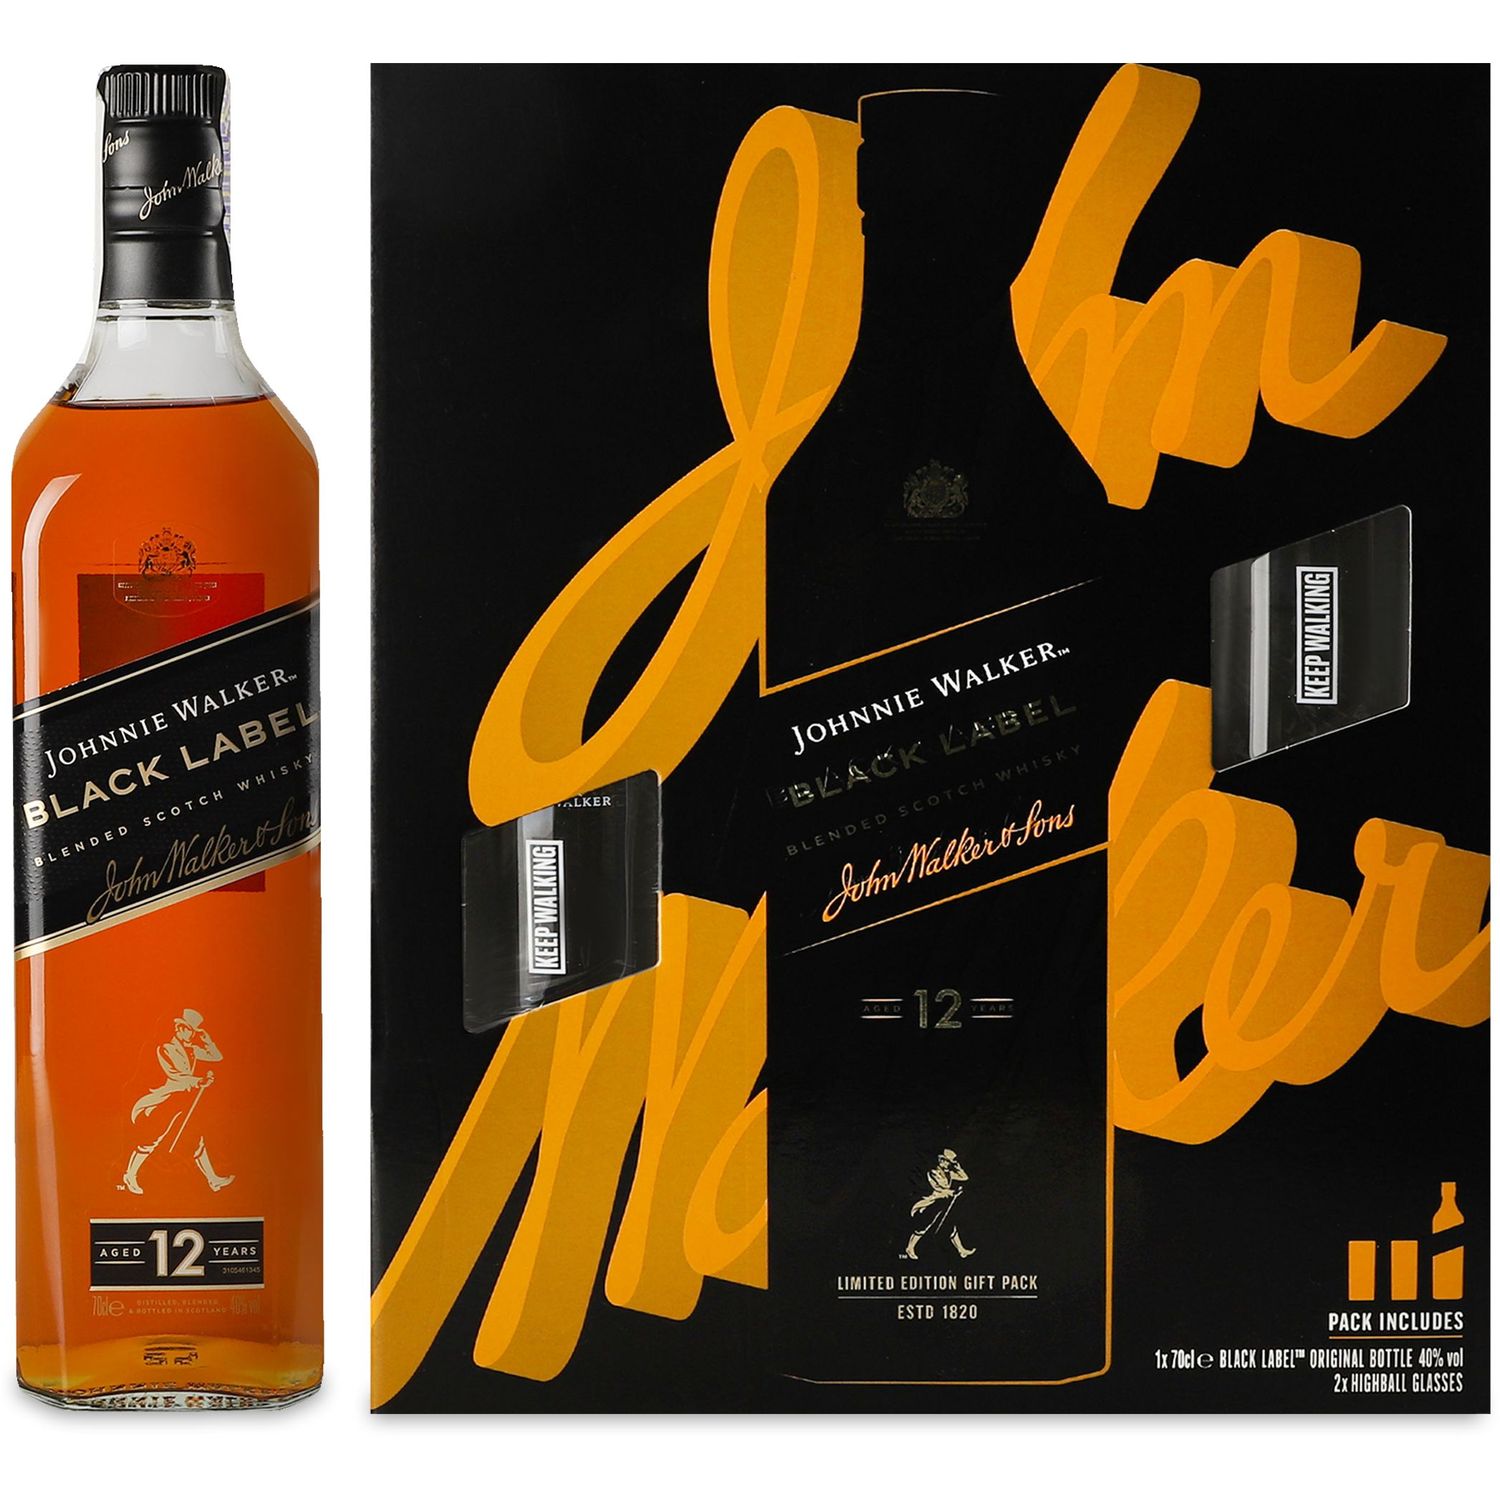 Виски Johnnie Walker Black label Blended Scotch Whisky, 40%, 0,7 л + 2 стакана - фото 1